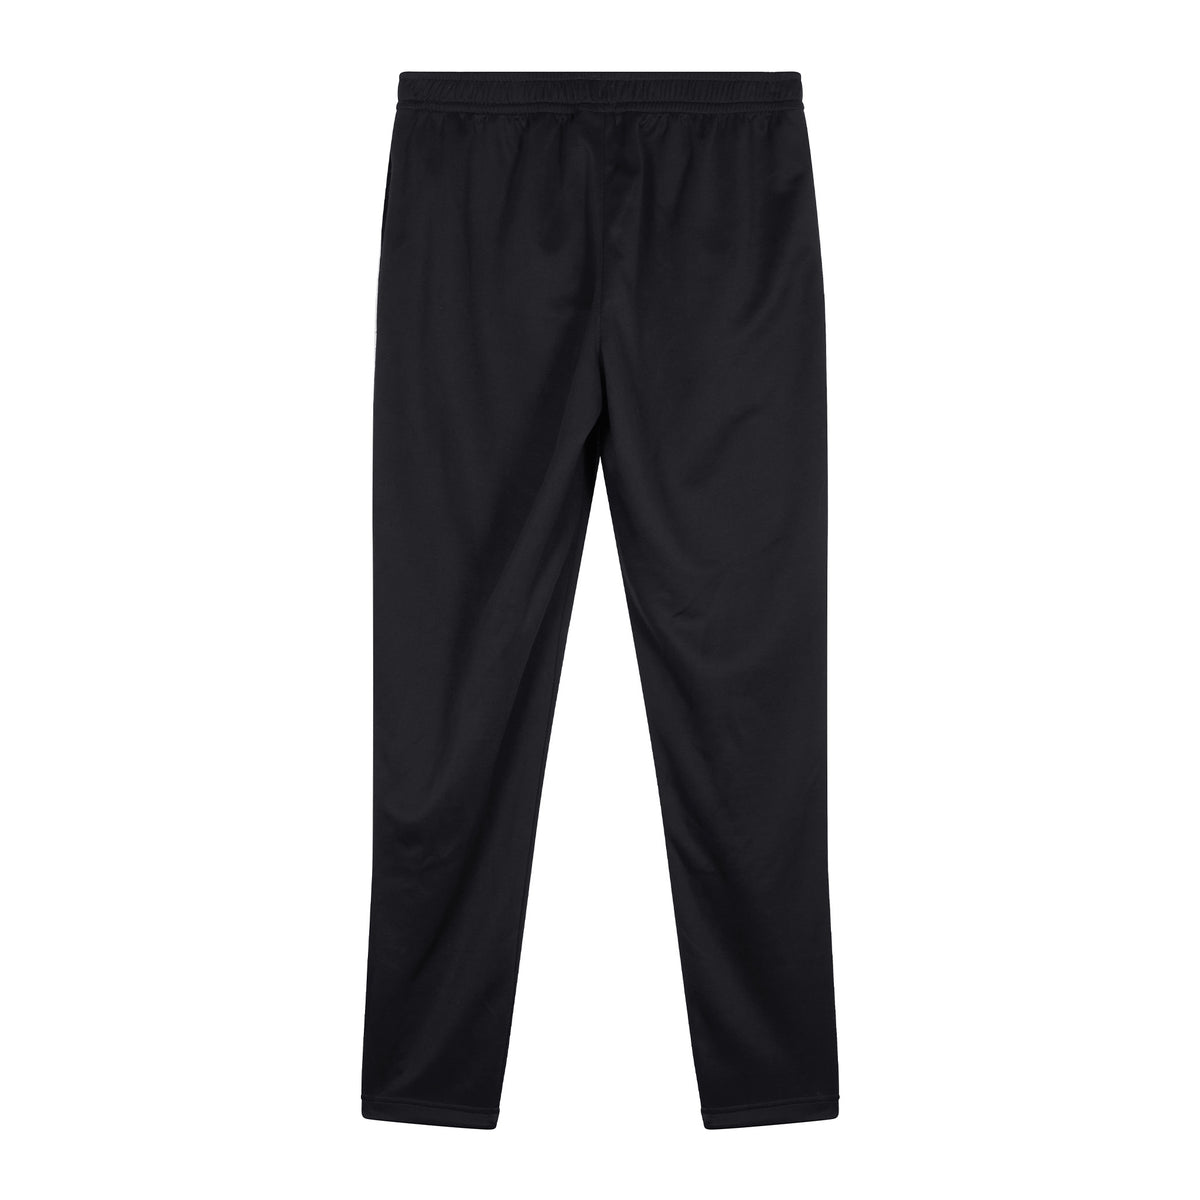 Marlow RFC Women's Tapered Stretch Pant